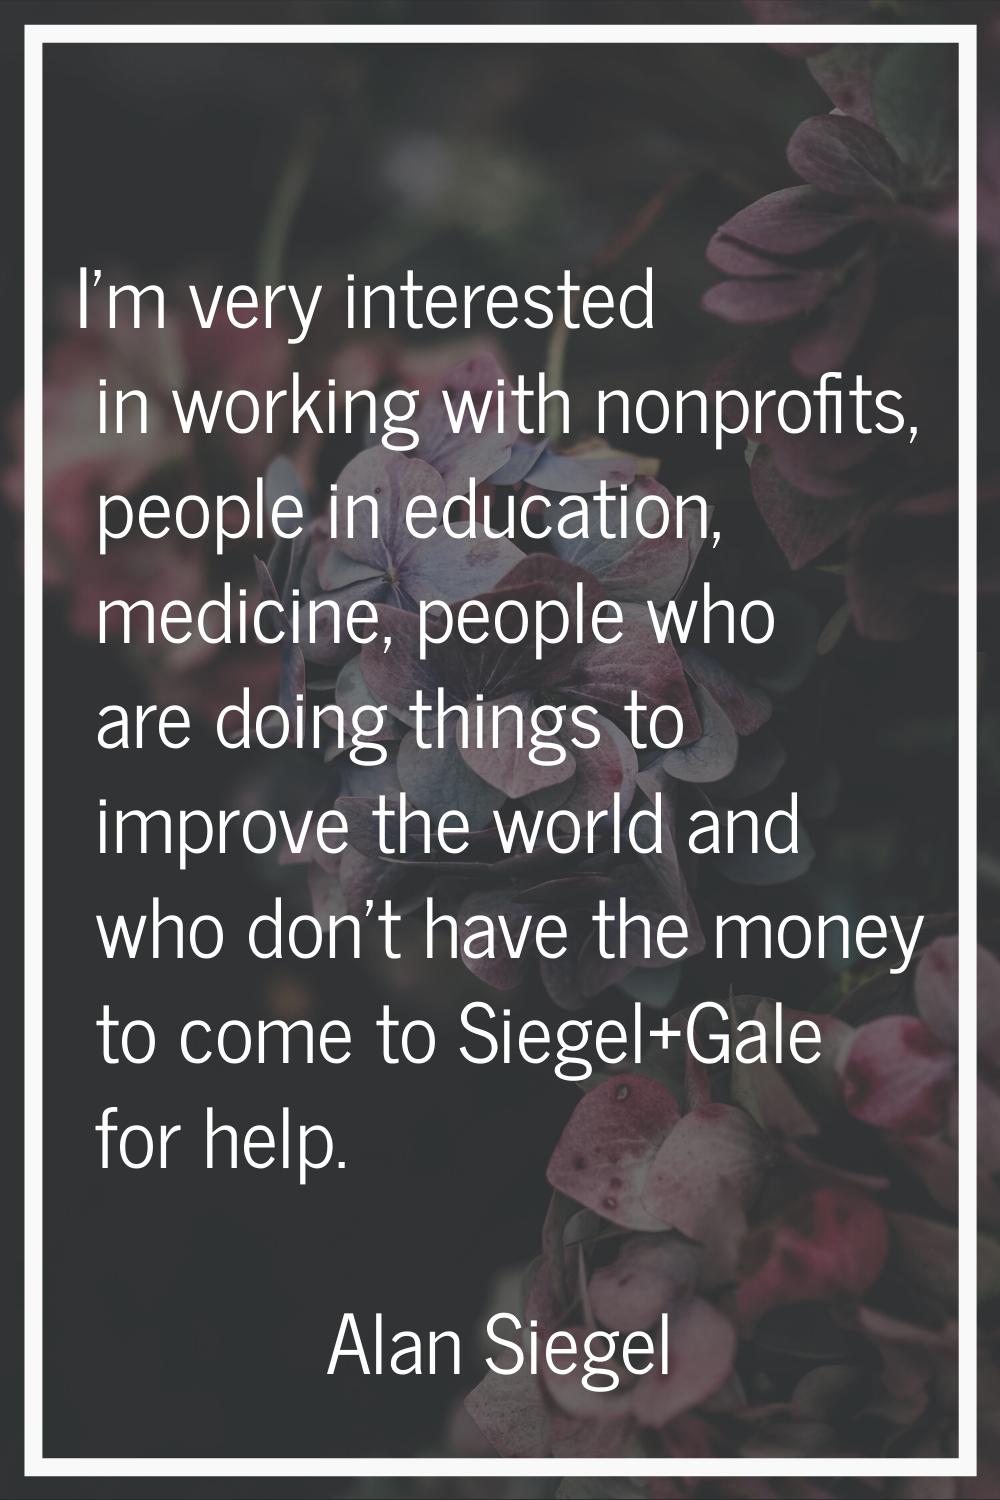 I'm very interested in working with nonprofits, people in education, medicine, people who are doing